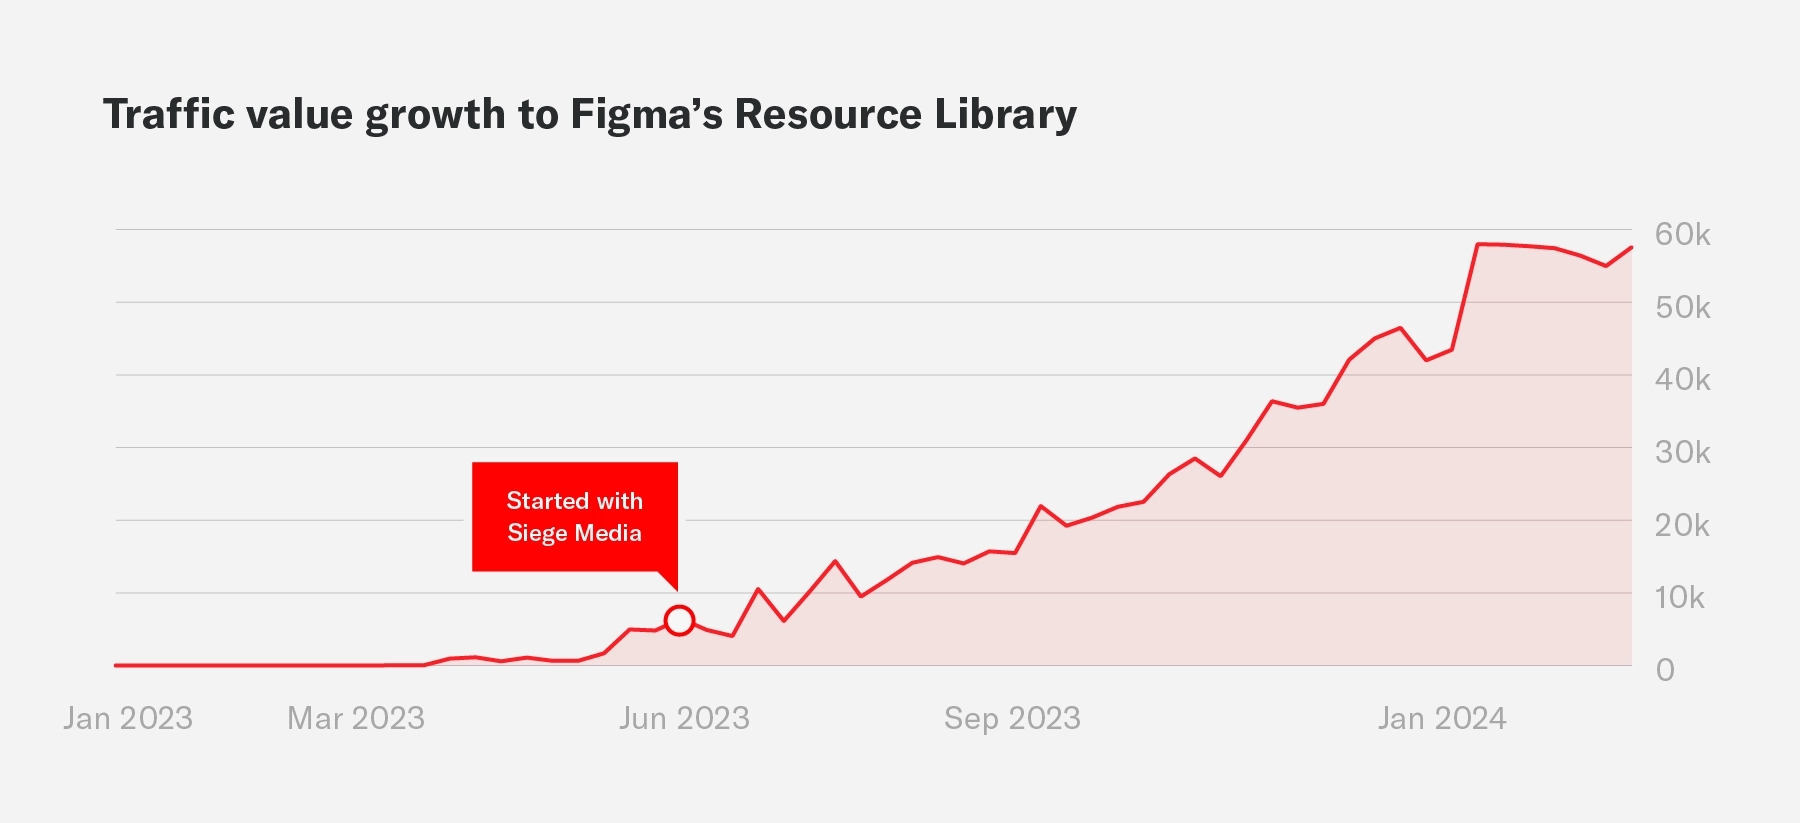 A graph showing the traffic value growth to Figma's Resource Library during an engagement with Siege Media